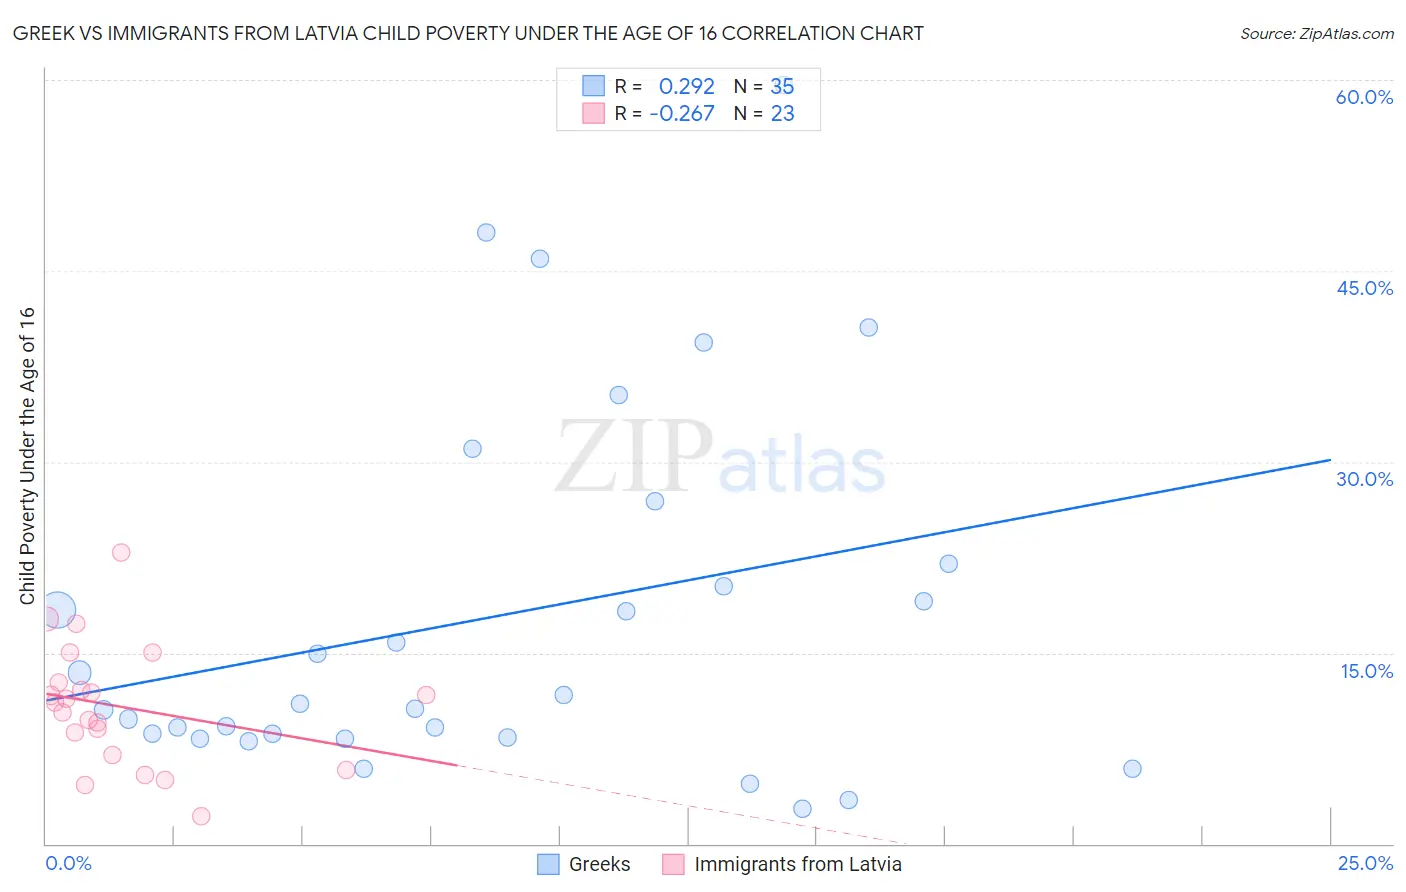 Greek vs Immigrants from Latvia Child Poverty Under the Age of 16